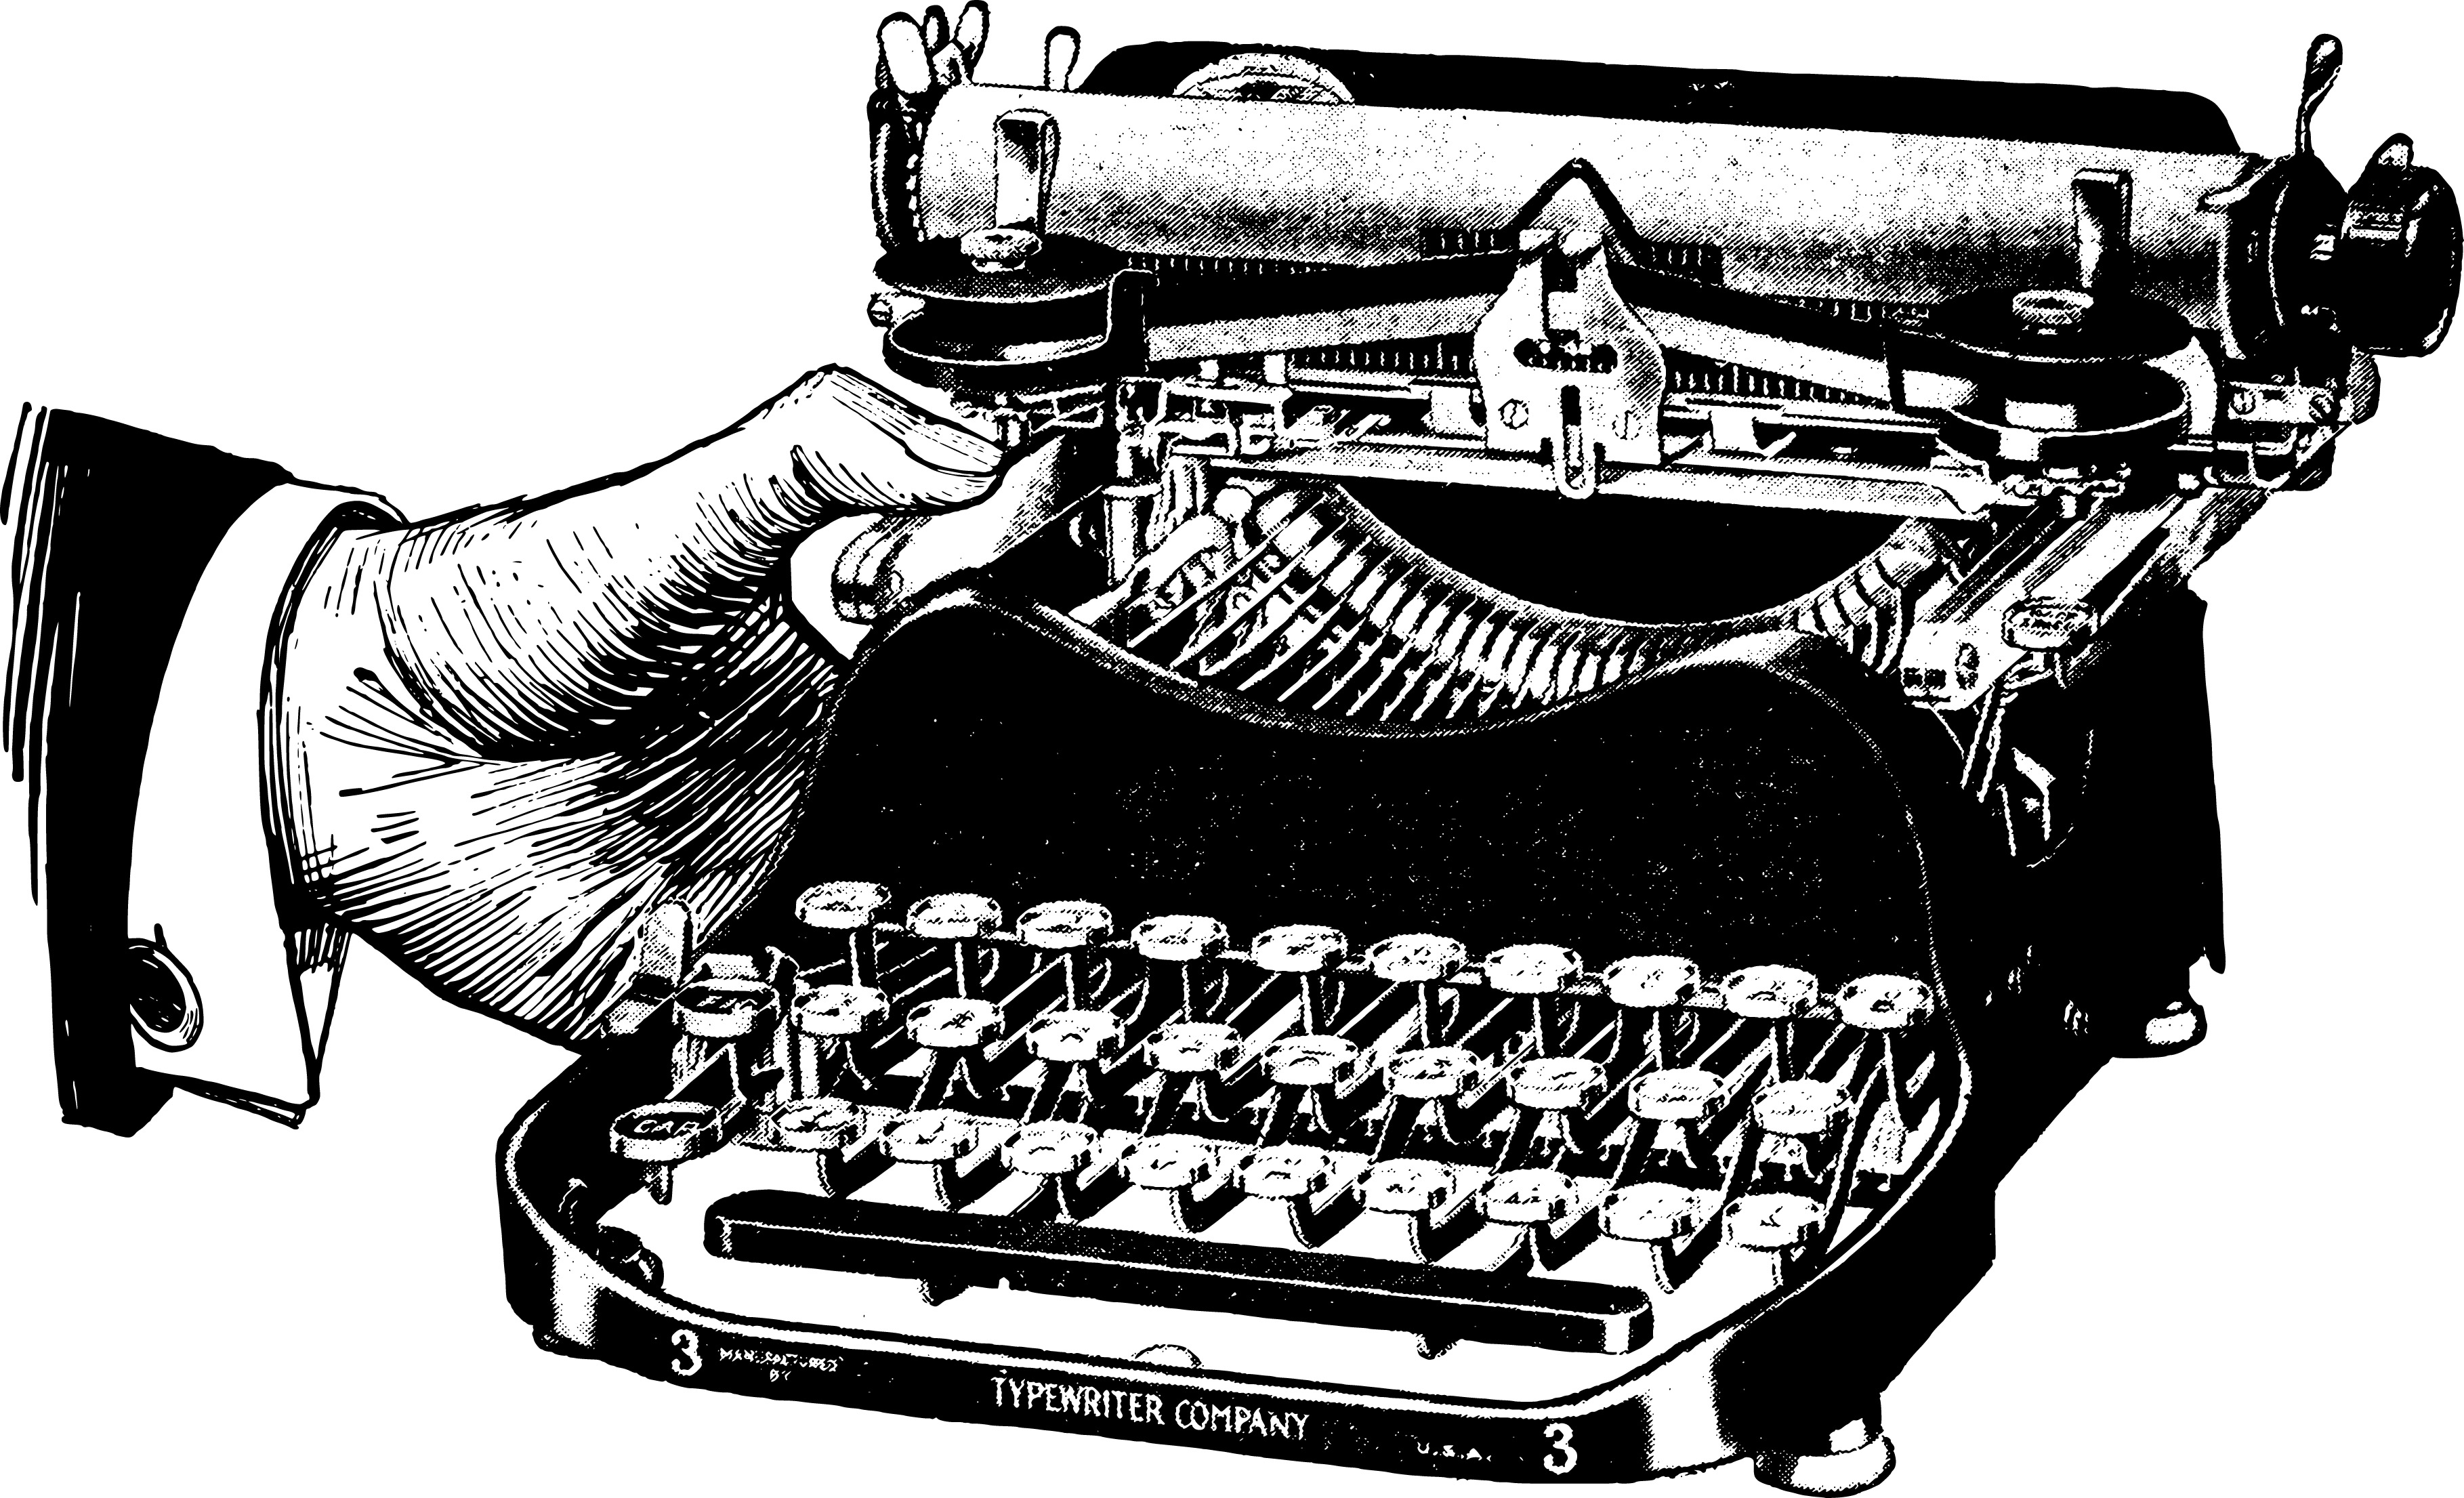 Black and white drawing of an old-fashioned typewriter, held by a man’s hand.